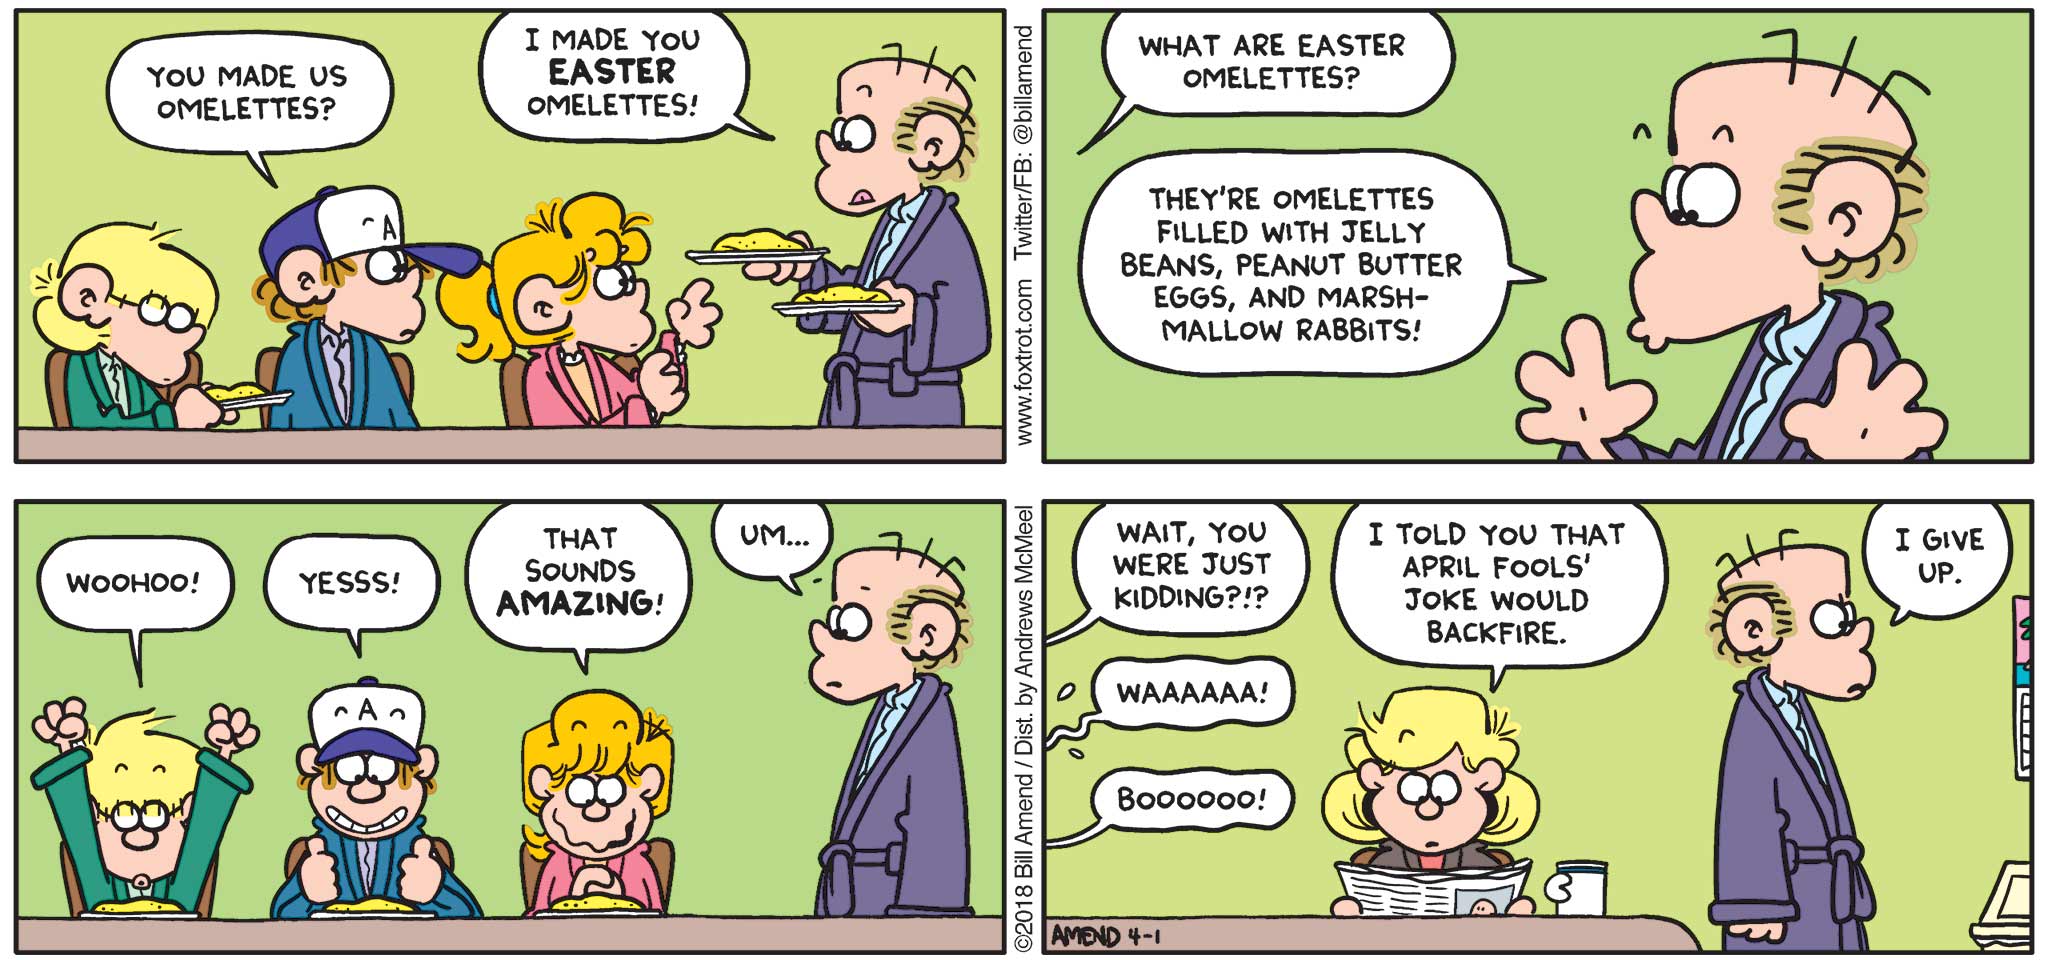 FoxTrot by Bill Amend - "Easter Omelettes" published April 1, 2018 - Peter says: You made us omelettes? Peter says: I made you Easter omelettes! The kids ask: What are Easter omelettes? Peter says: They're omelettes filled with jelly beans, peanut butter eggs, and marshmallow rabbits! Jason says: Woohoo! Peter says: Yesss! Paige says: That sounds AMAZING! Roger says: Um... The kids ask: Wait, you were just kidding?!? WAAAA! Andy says: I told you that April Fools' joke would backfire. Peter says: I give up.